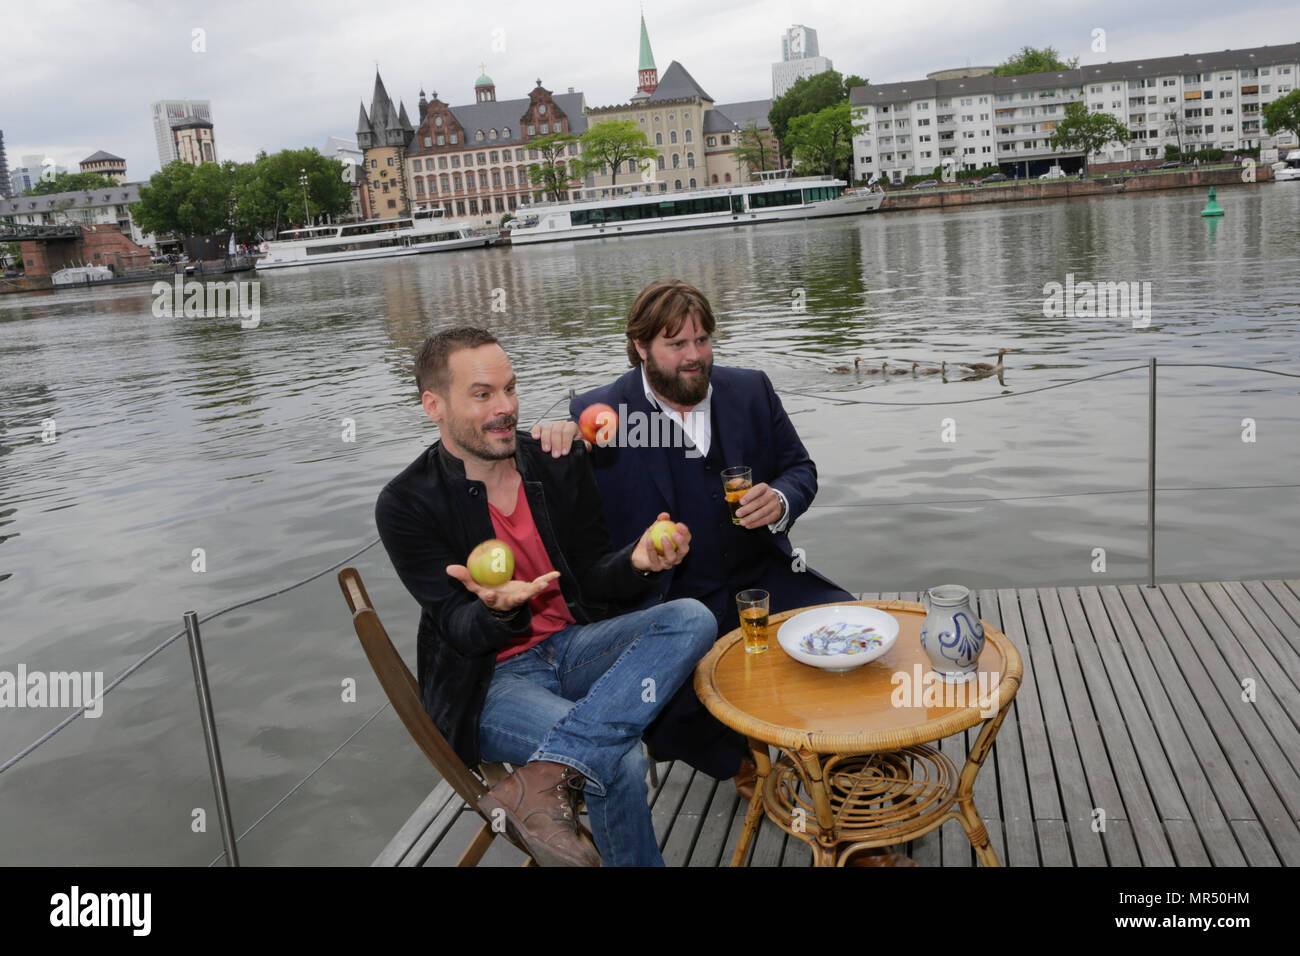 Actors Wanja Mues (left) and Antoine Monot, Jr. (right) pose on the terrace of the houseboat that is owned by Mues' character Leo in the TV show with two glasses of cider and a Bembel (a local type of stoneware jug, used for cider).  Wanja Mues juggles three apples. 4 new episodes of the relaunch of the long running TV series 'Ein Fall fuer zwei’ (A case for two) are being filmed in Frankfurt for the German state TV broadcaster ZDF (Zweites Deutsches Fernsehen). It stars Antoine Monot, Jr. as defence attorney Benjamin ‘Benni’ Hornberg and Wanja Mues as private investigator Leo Oswald. The epis Stock Photo